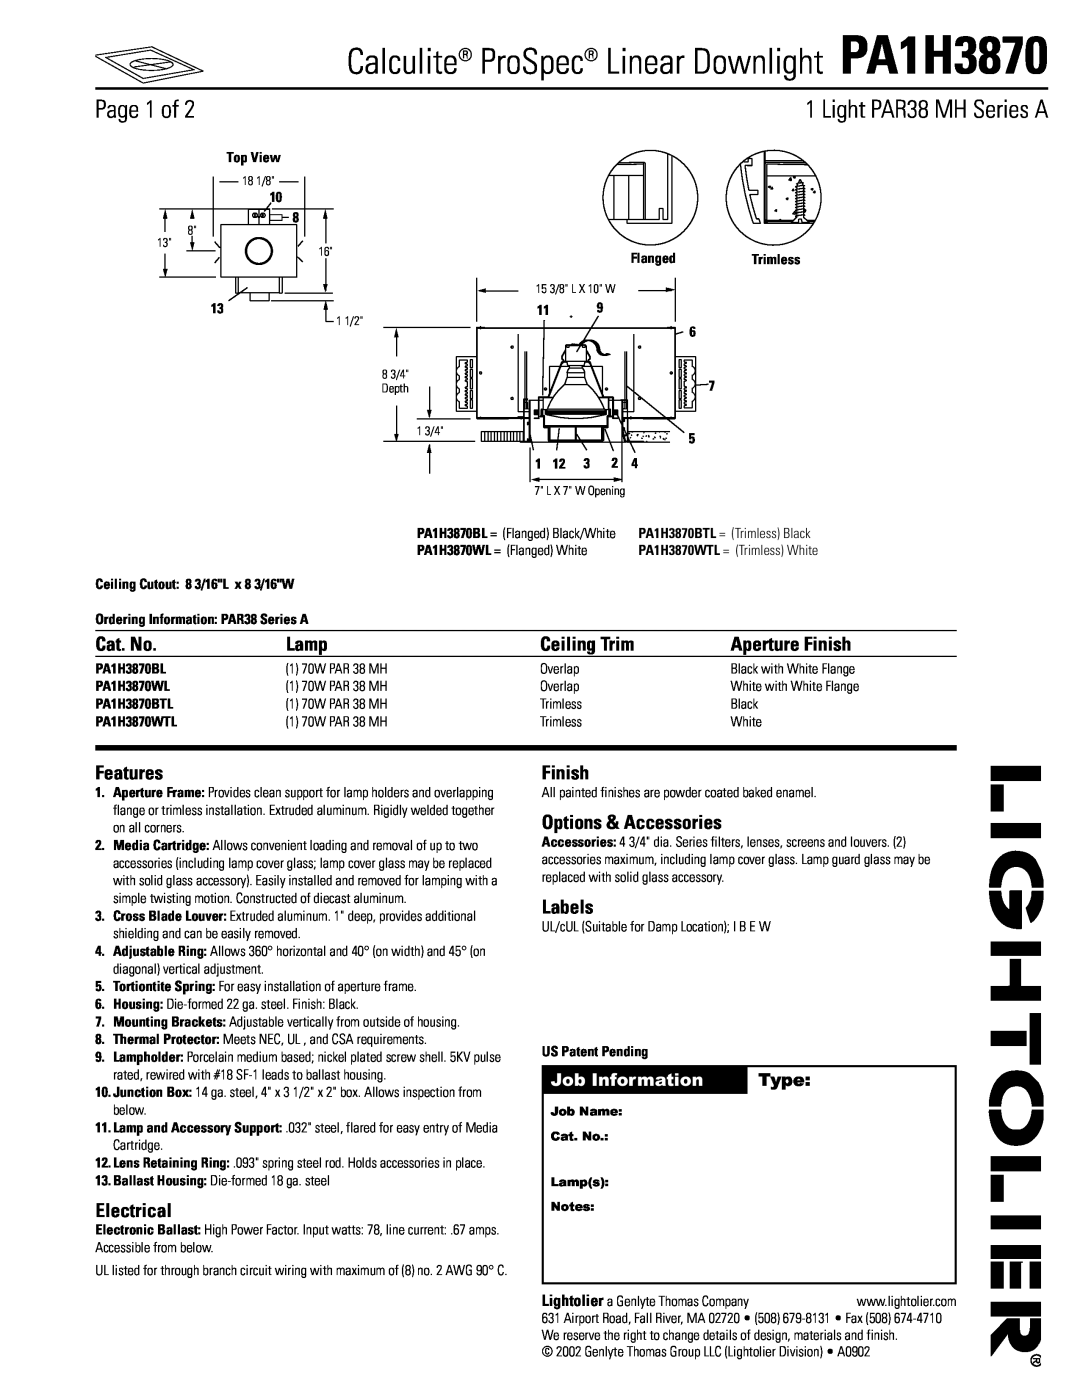 Lightolier PA1H3870 manual Page 1 of, Cat. No, Lamp, Ceiling Trim, Aperture Finish, Features, Electrical, Labels, Type 